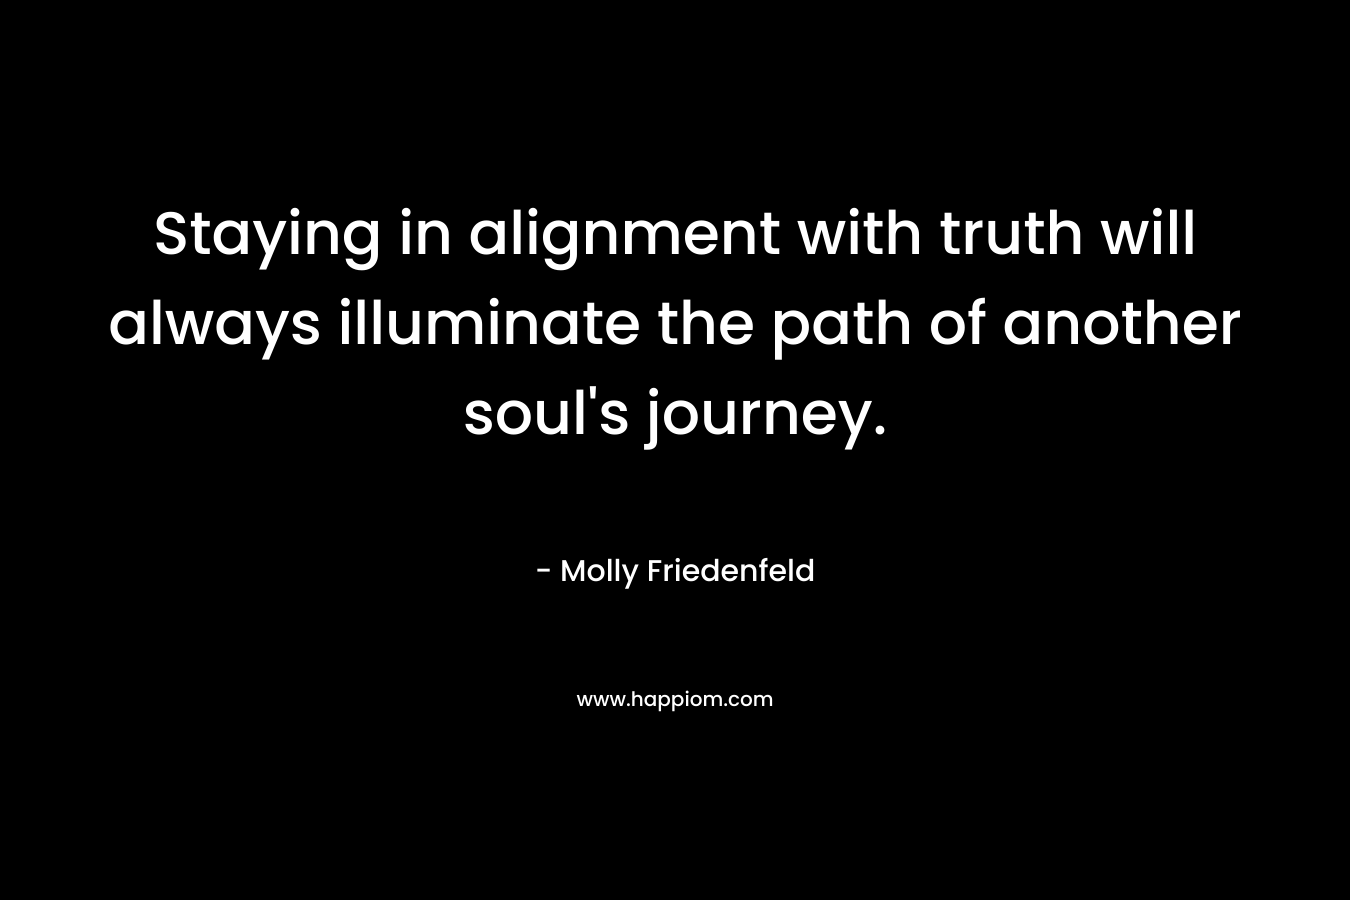 Staying in alignment with truth will always illuminate the path of another soul’s journey. – Molly Friedenfeld